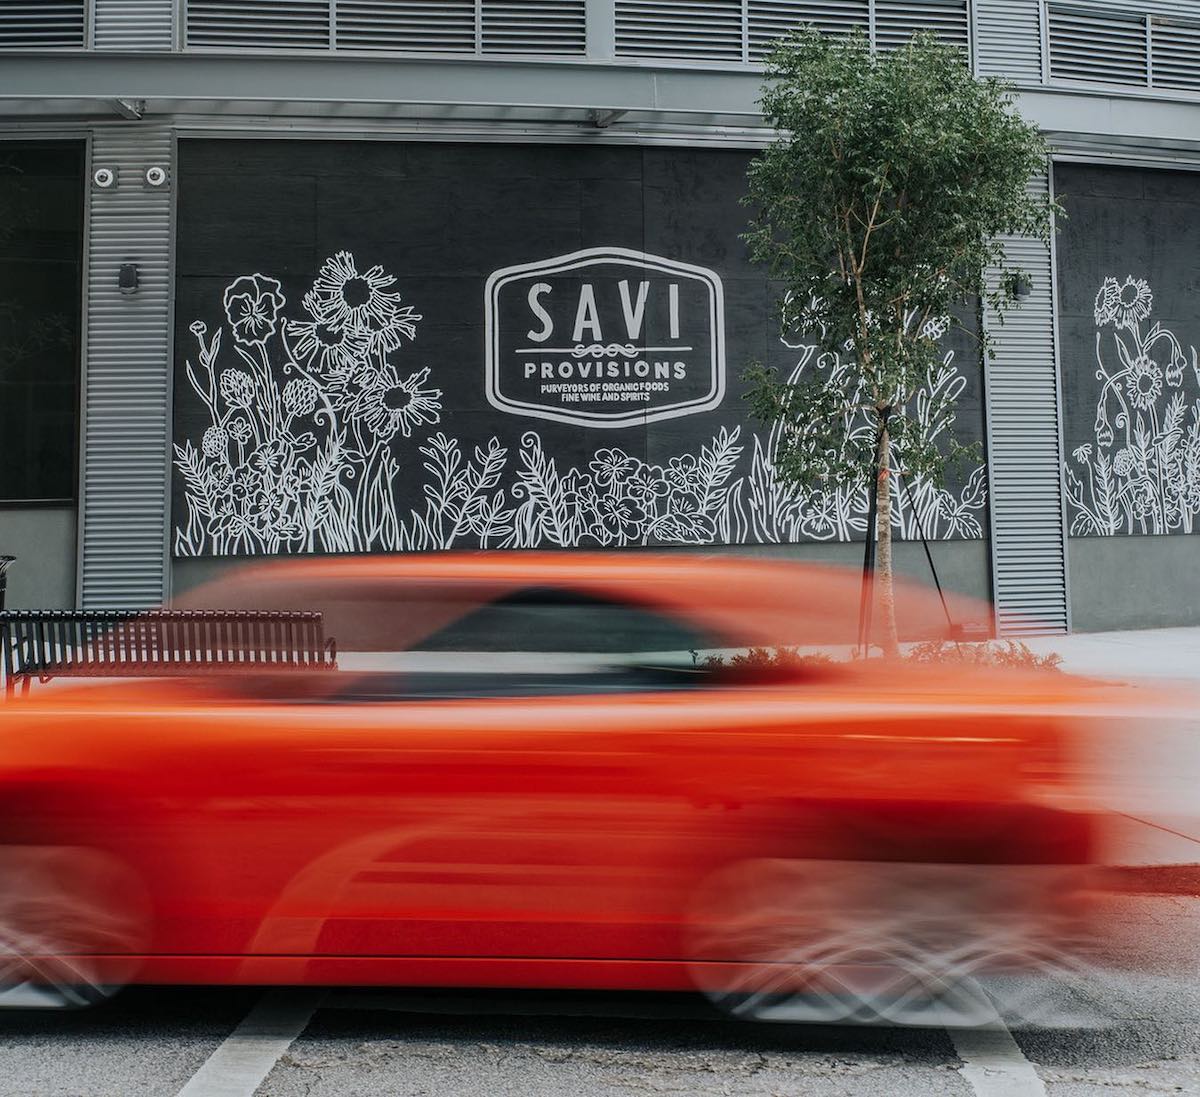 Savi Provisions To Open At Star Metals September 13